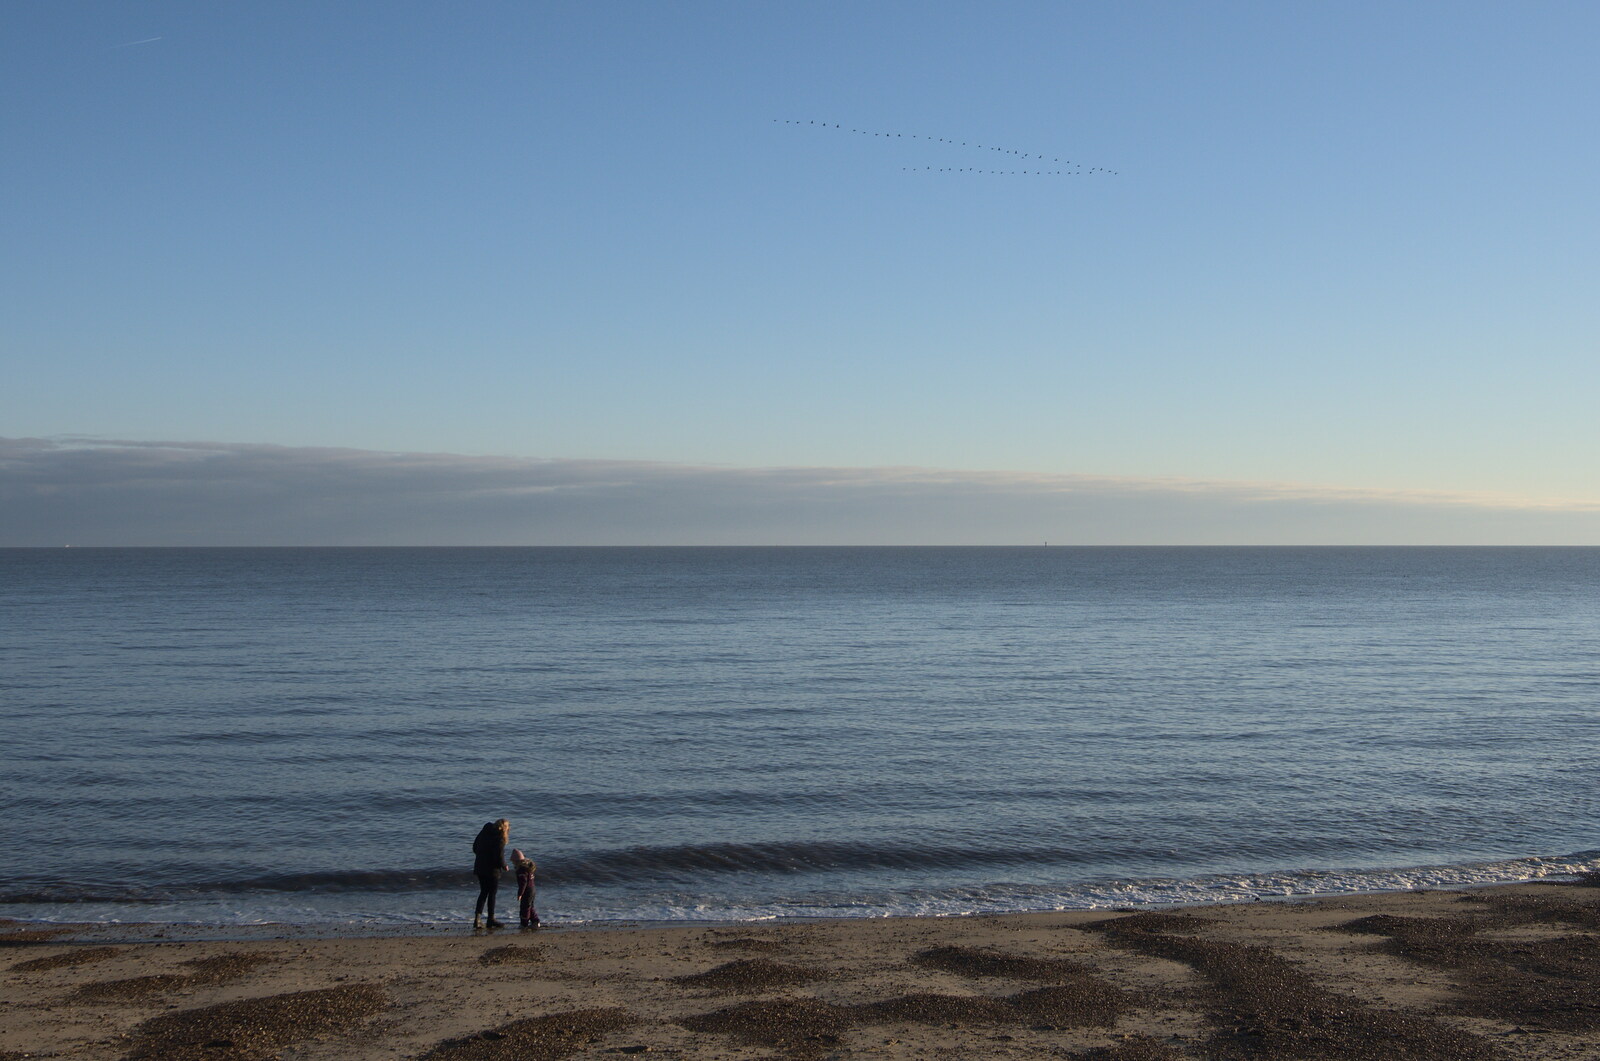 A Short Trip to Felixstowe, Suffolk - 22nd January 2023: Two people on an otherwise-empty beach